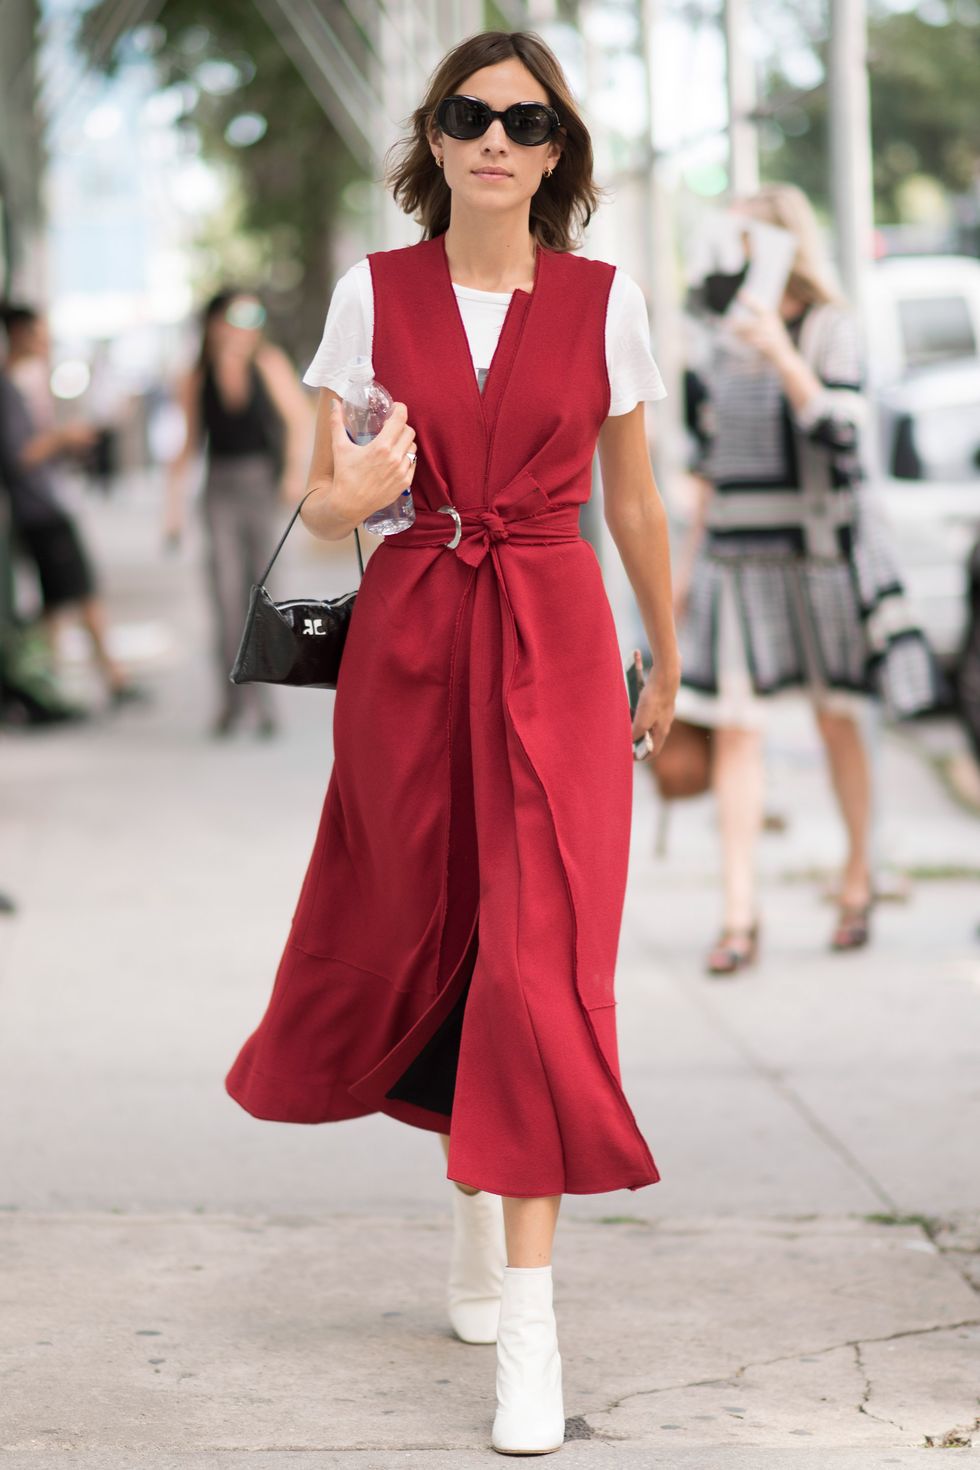 Alexa Chung in a red dress